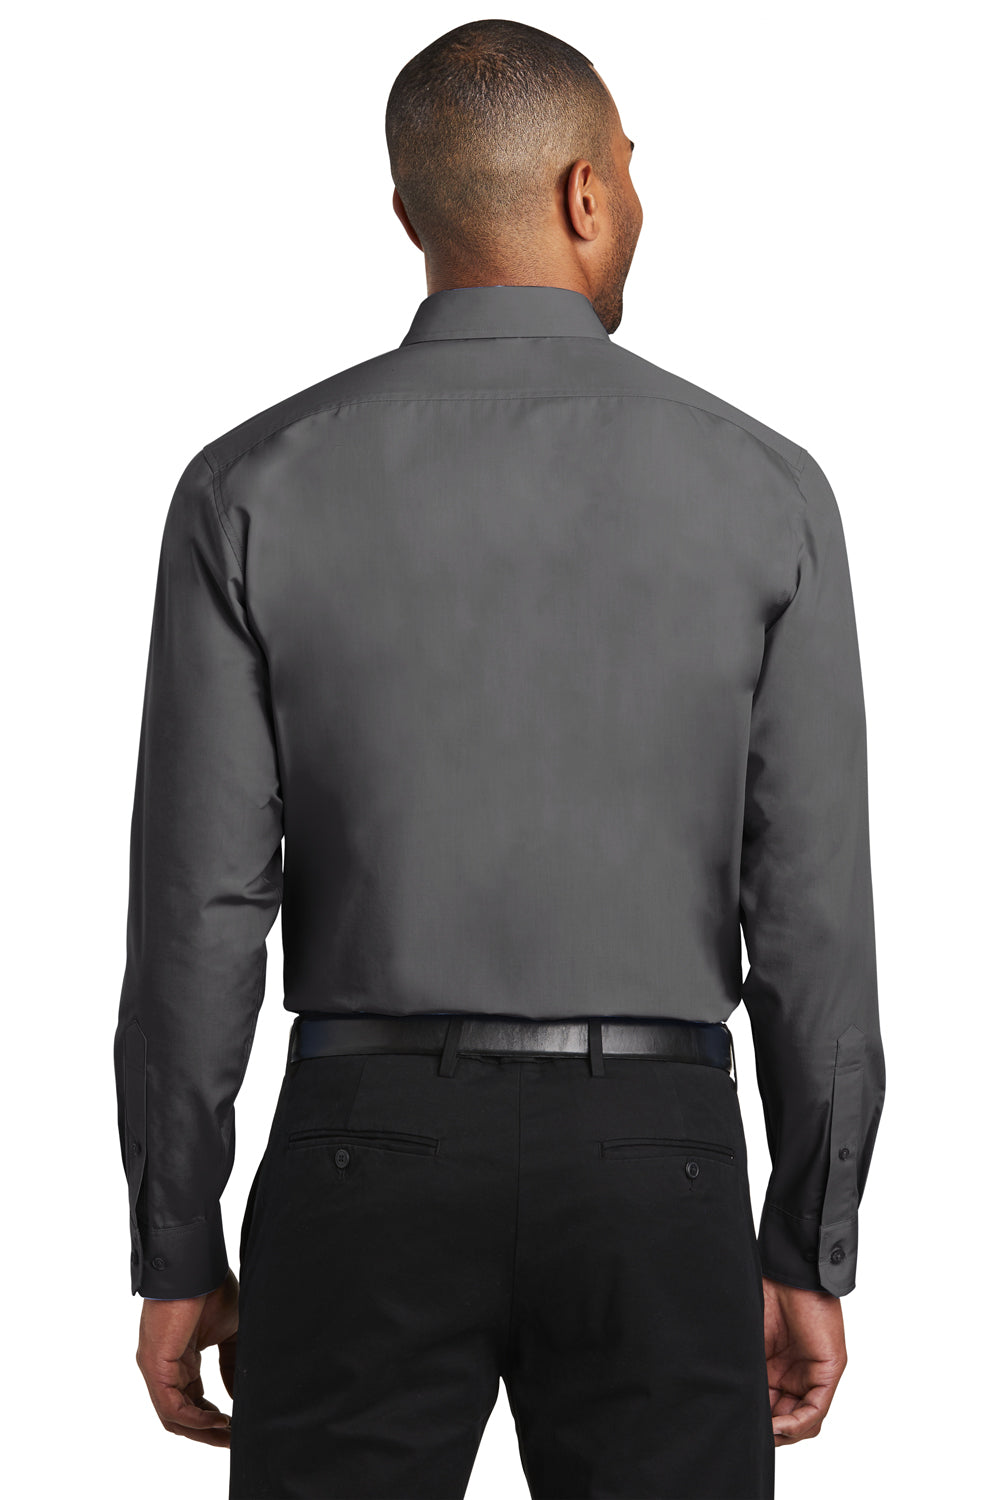 Port Authority W103 Mens Carefree Stain Resistant Long Sleeve Button Down Shirt Graphite Grey Back